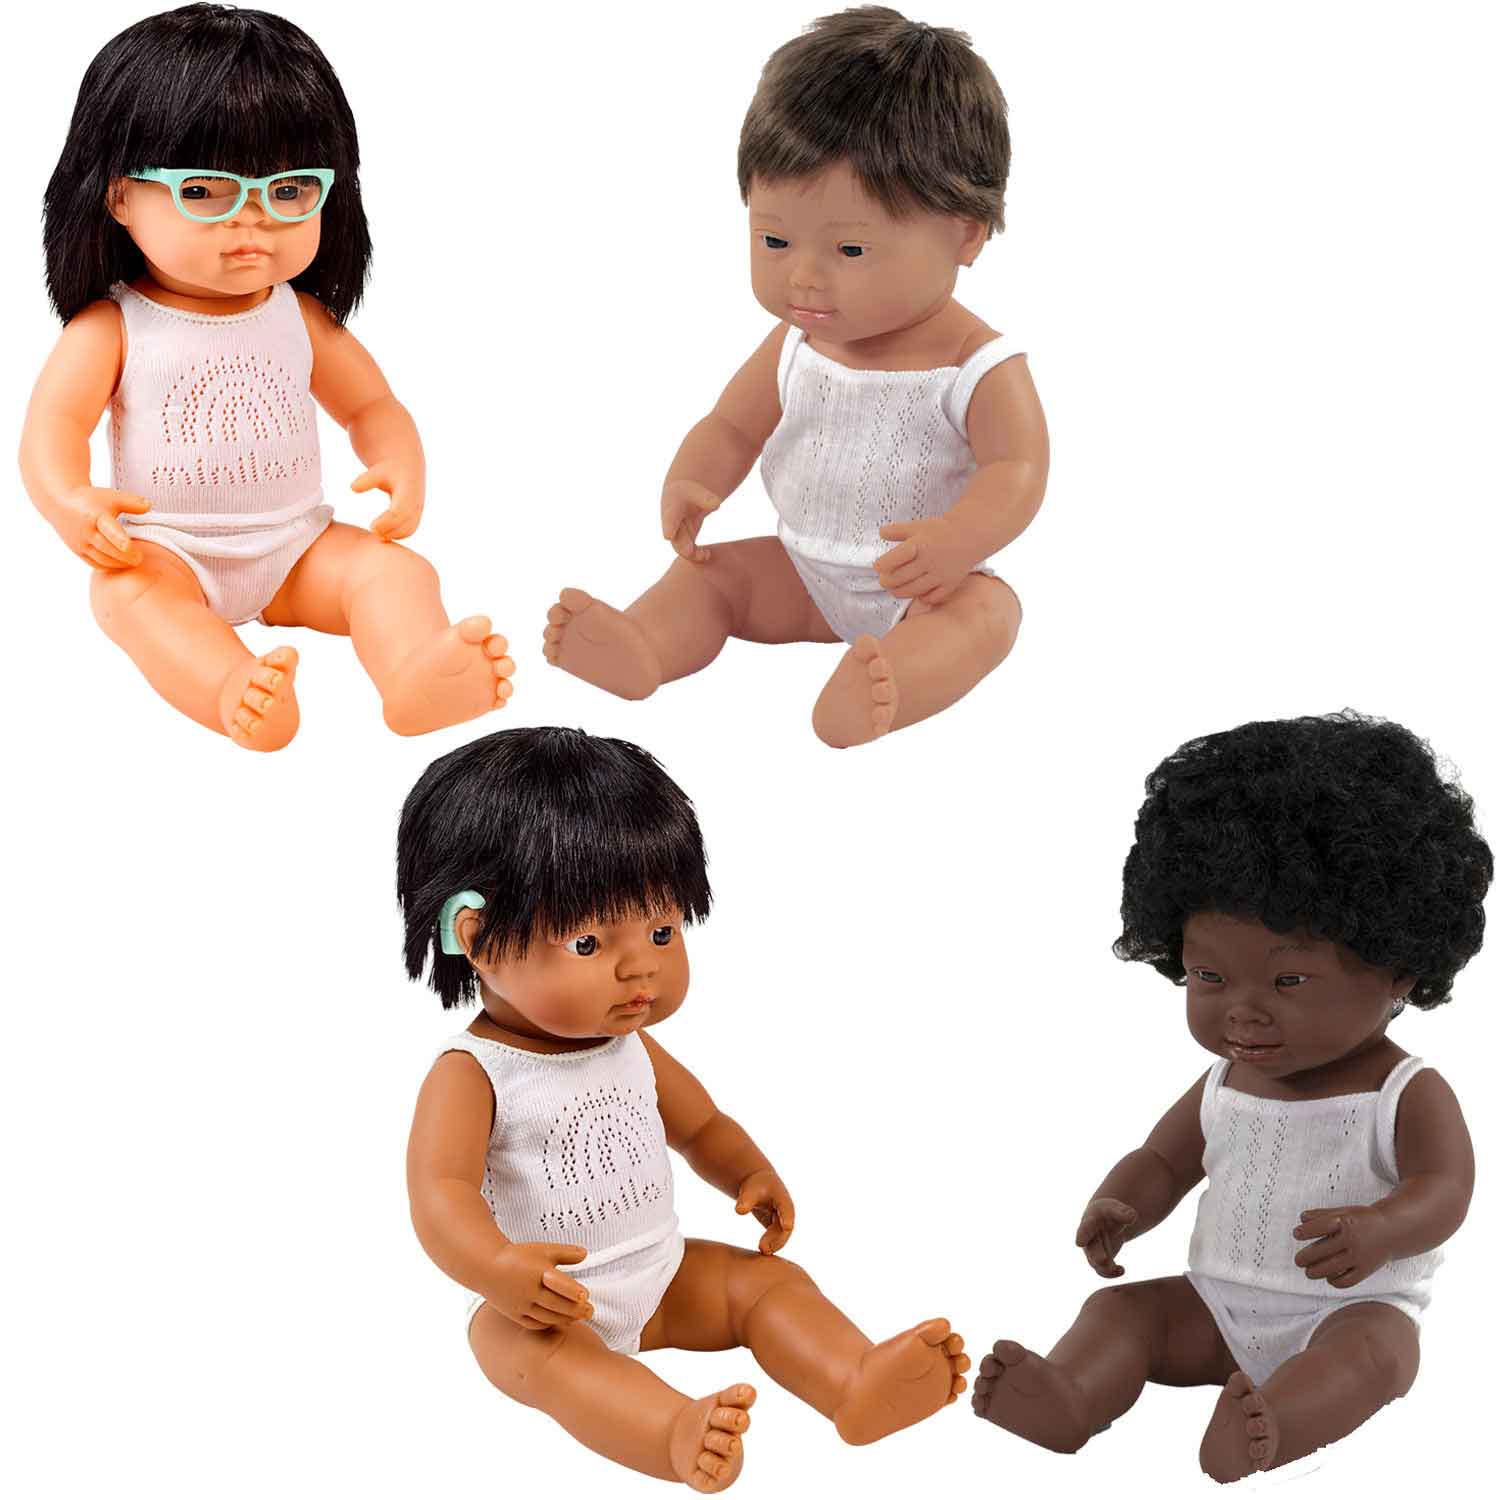 Our Inclusive Doll Collection